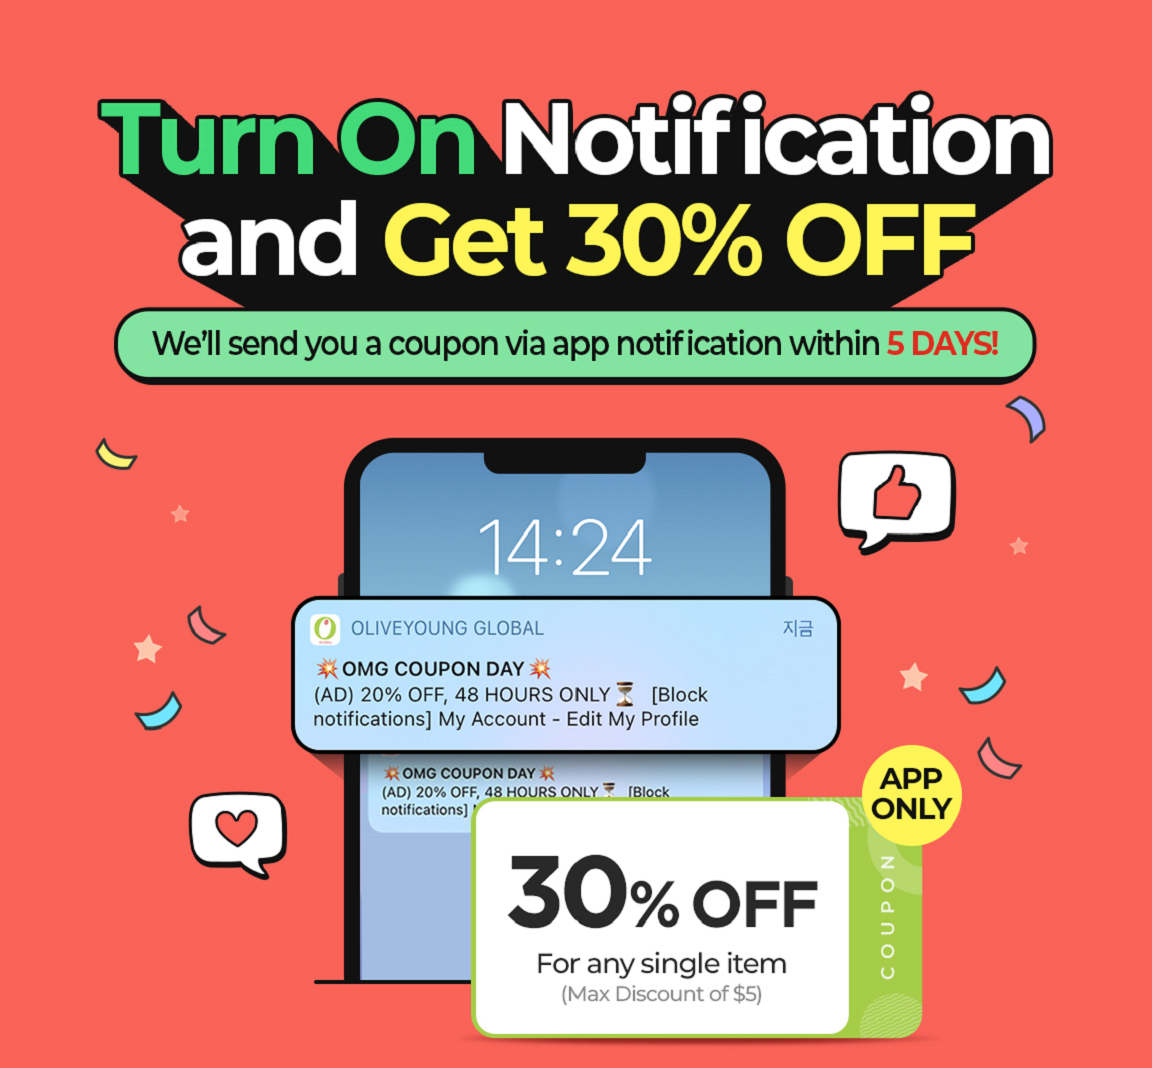 Turn On Notification and Get 30% OFF We’ll send you a coupon via app notification within 5 DAYS! NOTIFICATIONS 30% For any single item COUPON